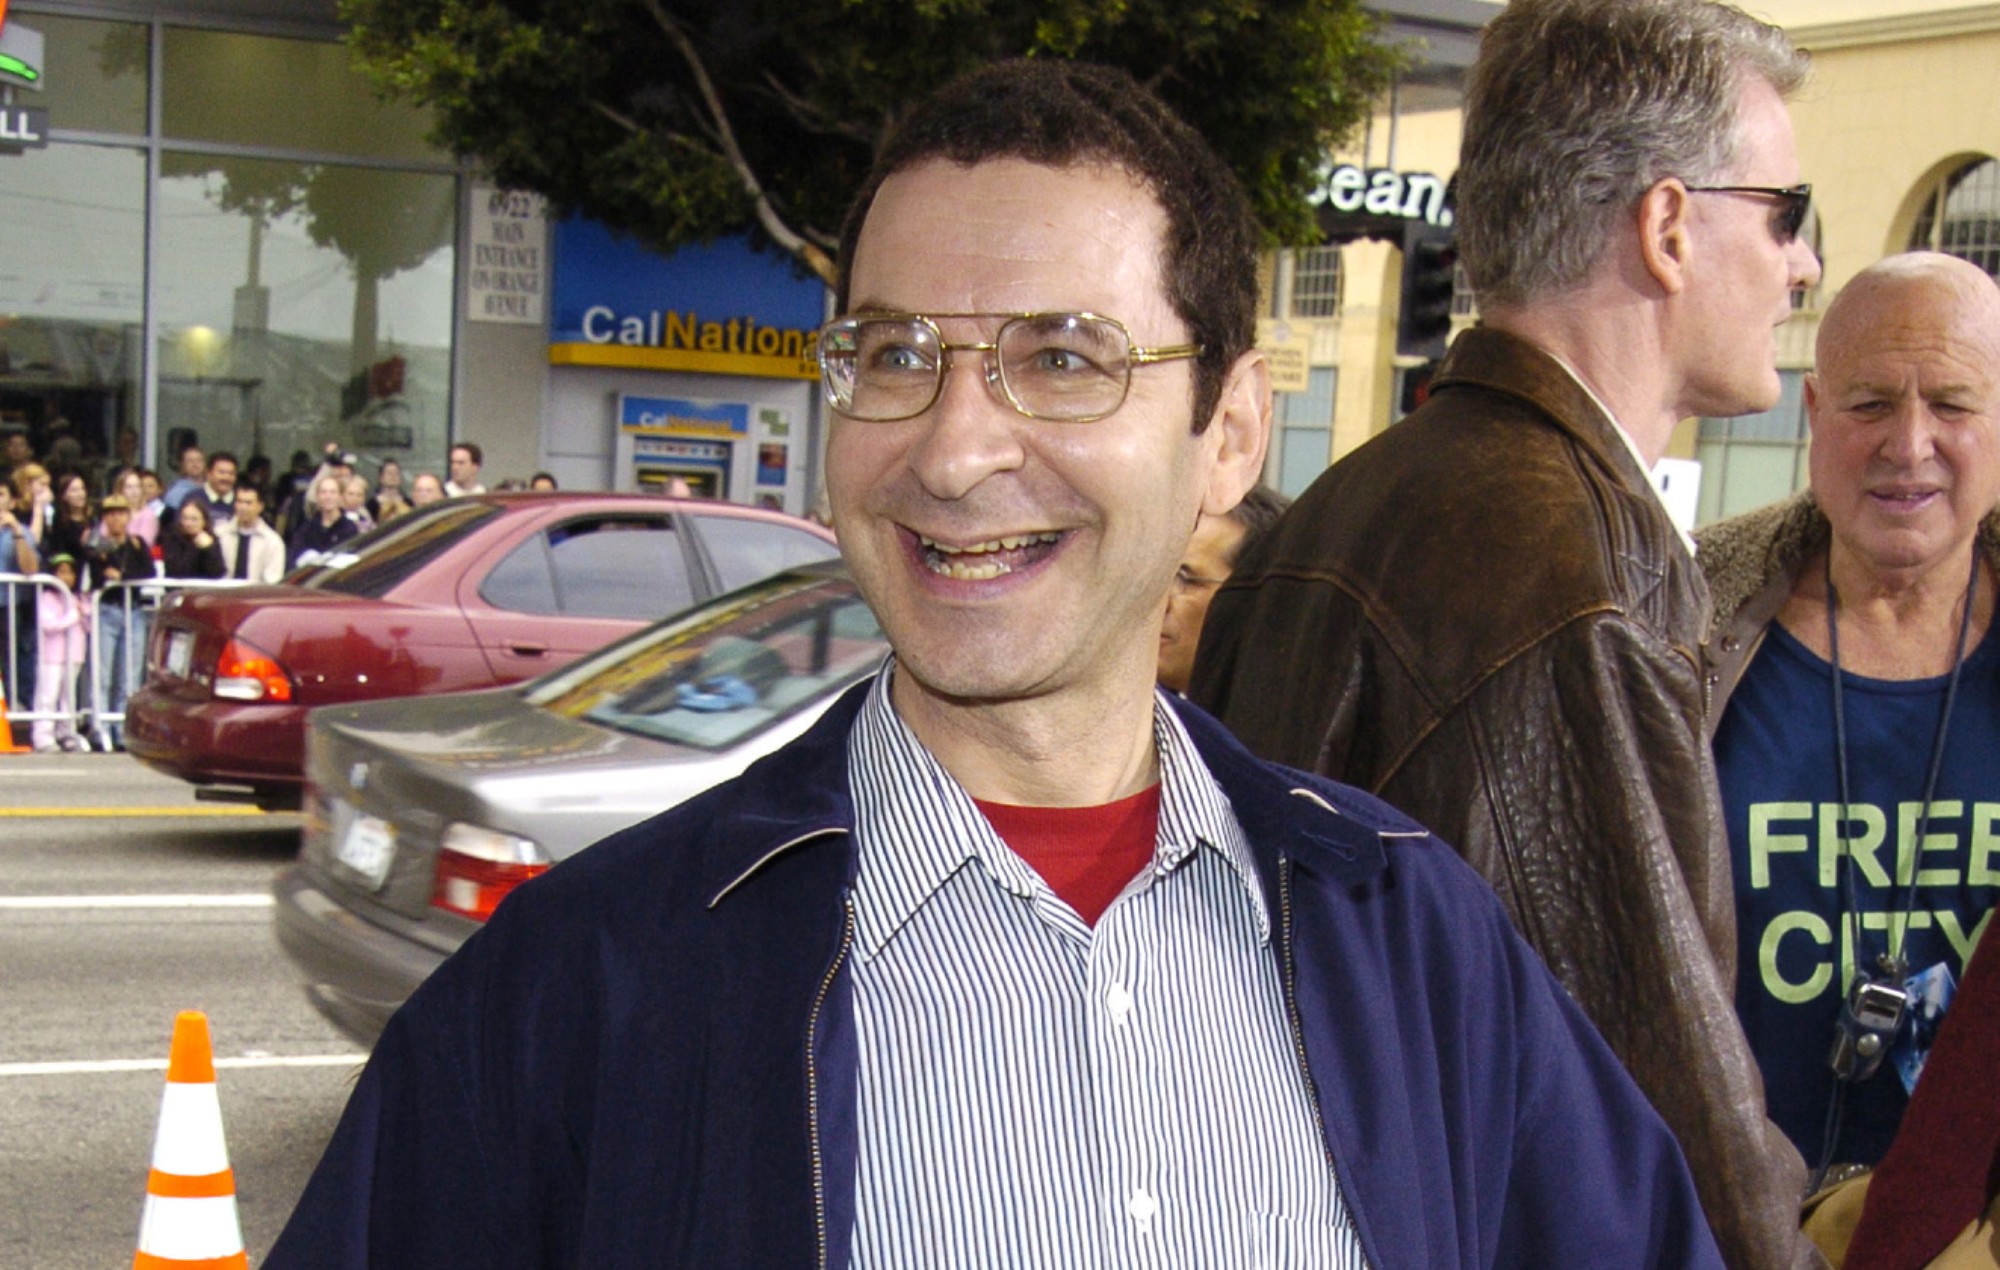 Eddie Deezen Grease Actor Arrested For Throwing Items at Police During Restaurant Disturbance!